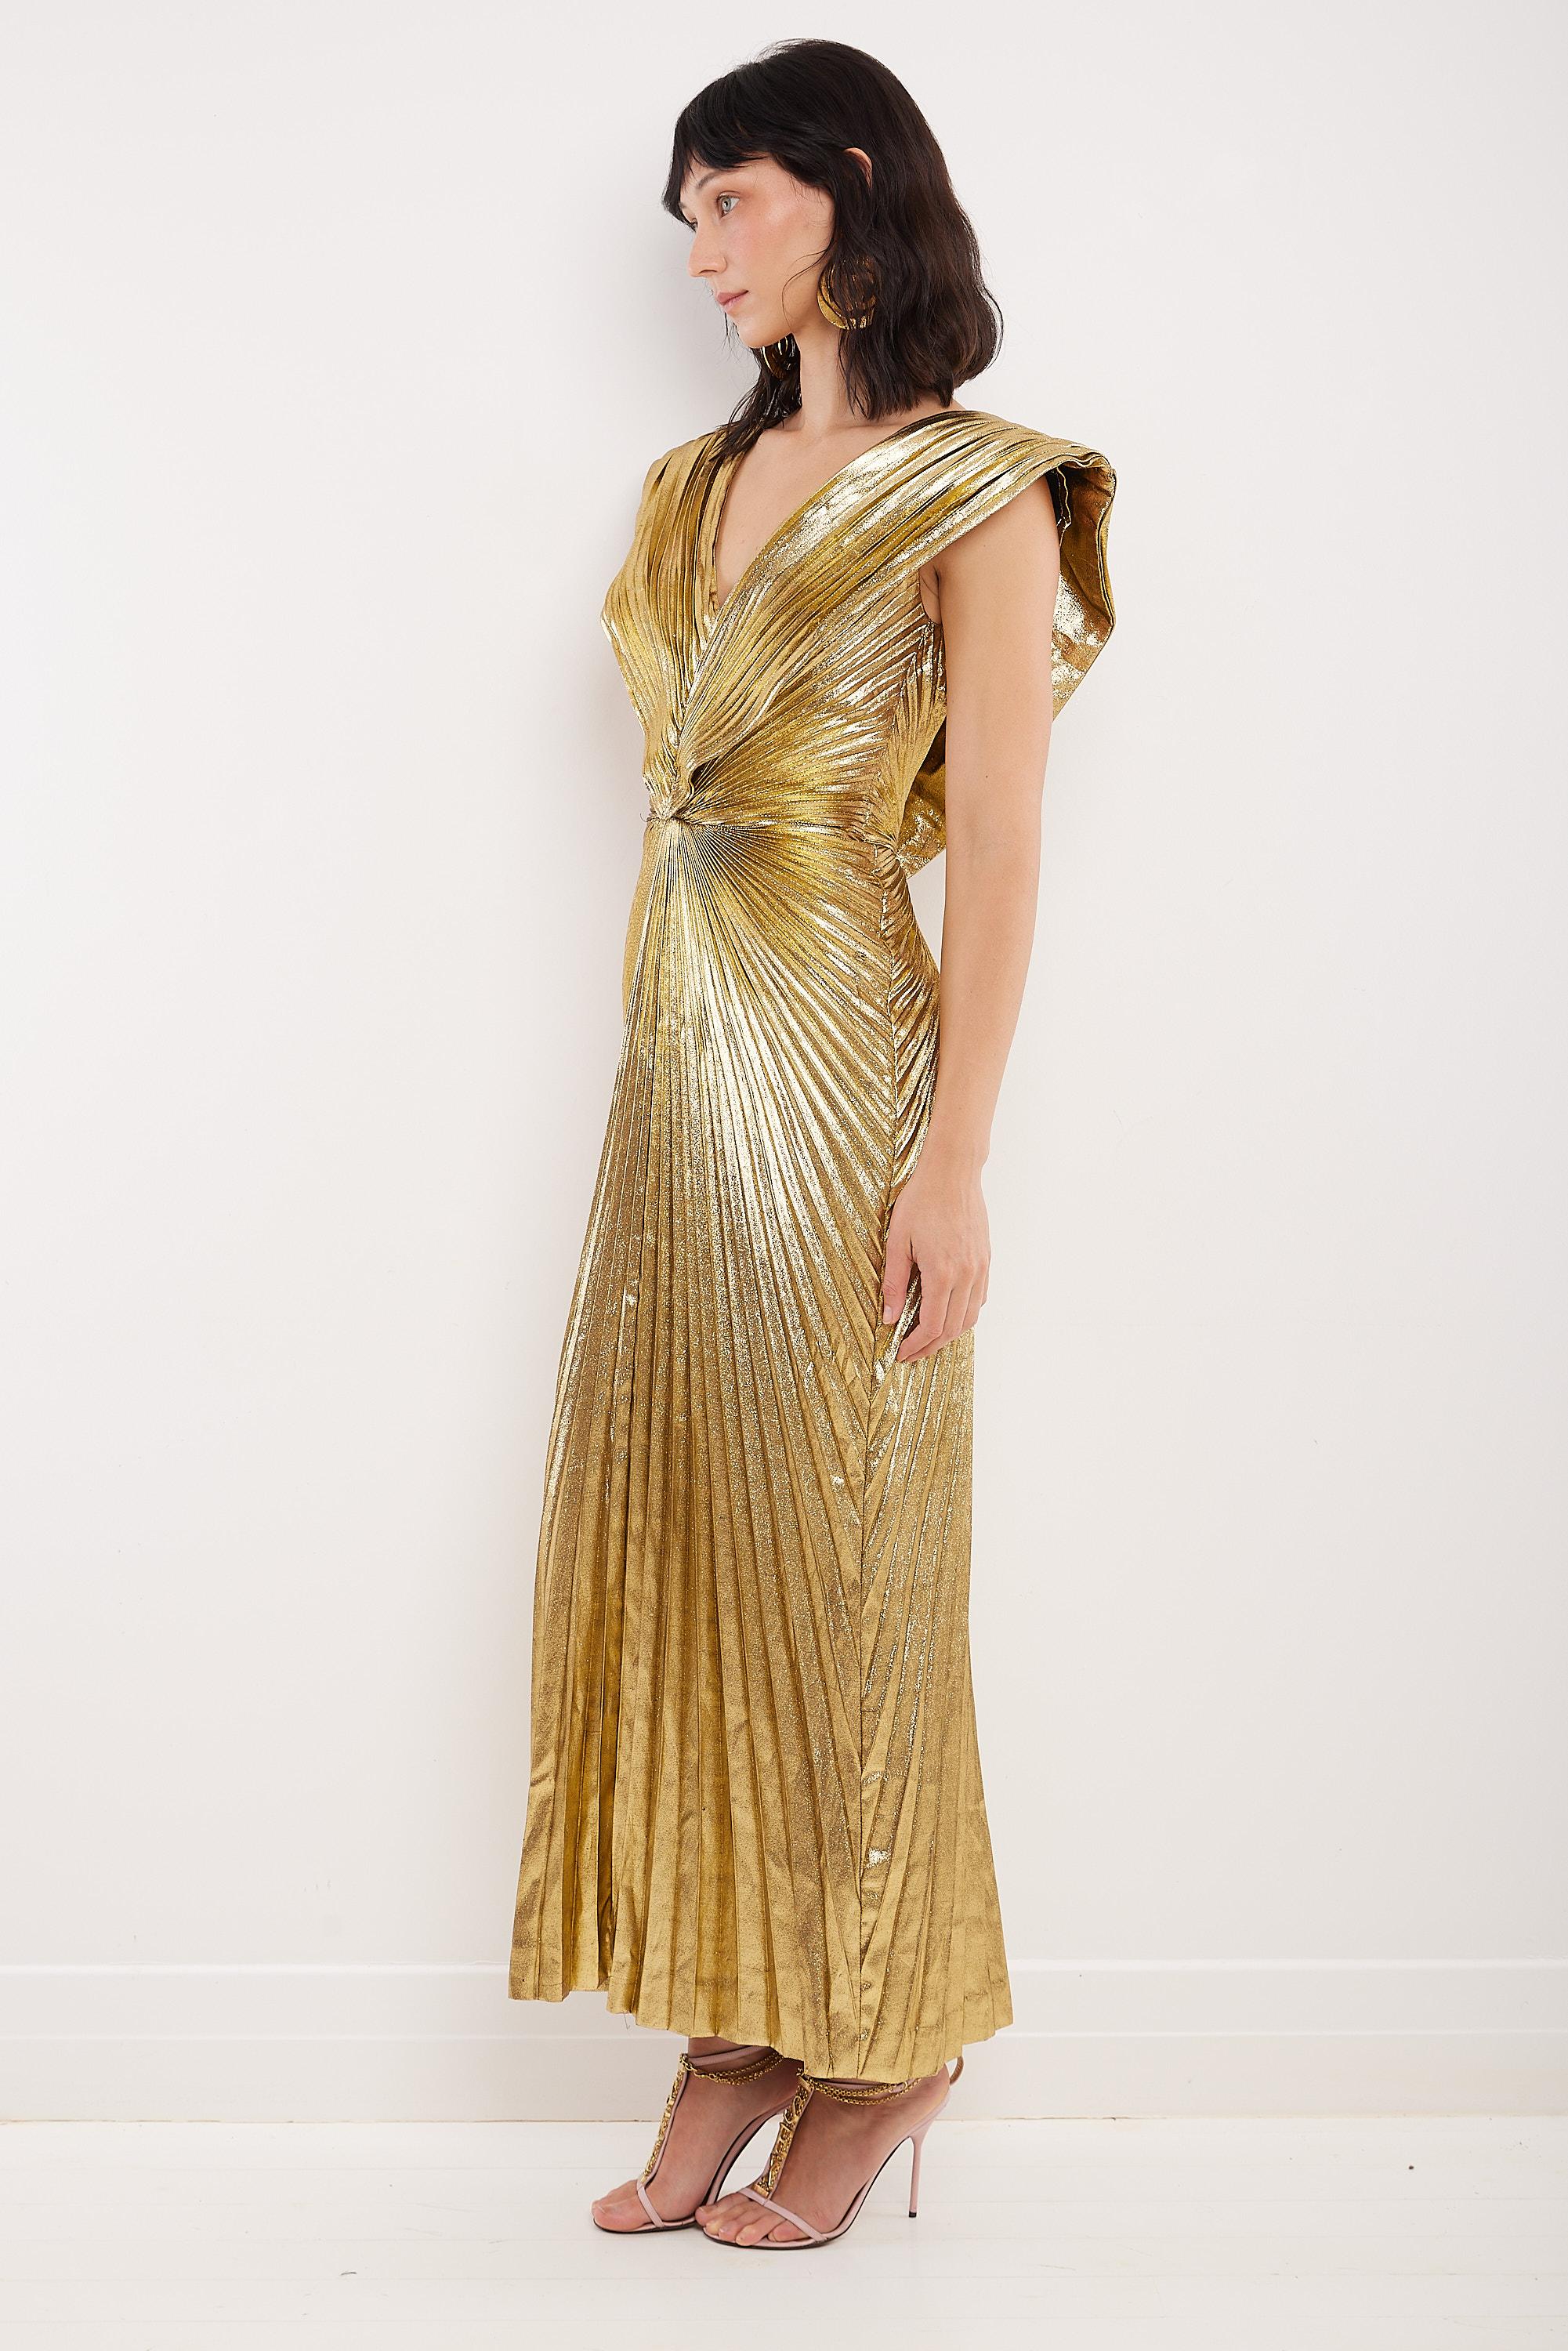 A veritable museum piece, this 1988 Loris Azzaro gown was worn by supermodel Amber Valletta to the ‘Gilded Glamour’ themed 2022 Met Gala where she was fêted as best dressed at the event. Constructed to couture standards of gold lamé, it features an